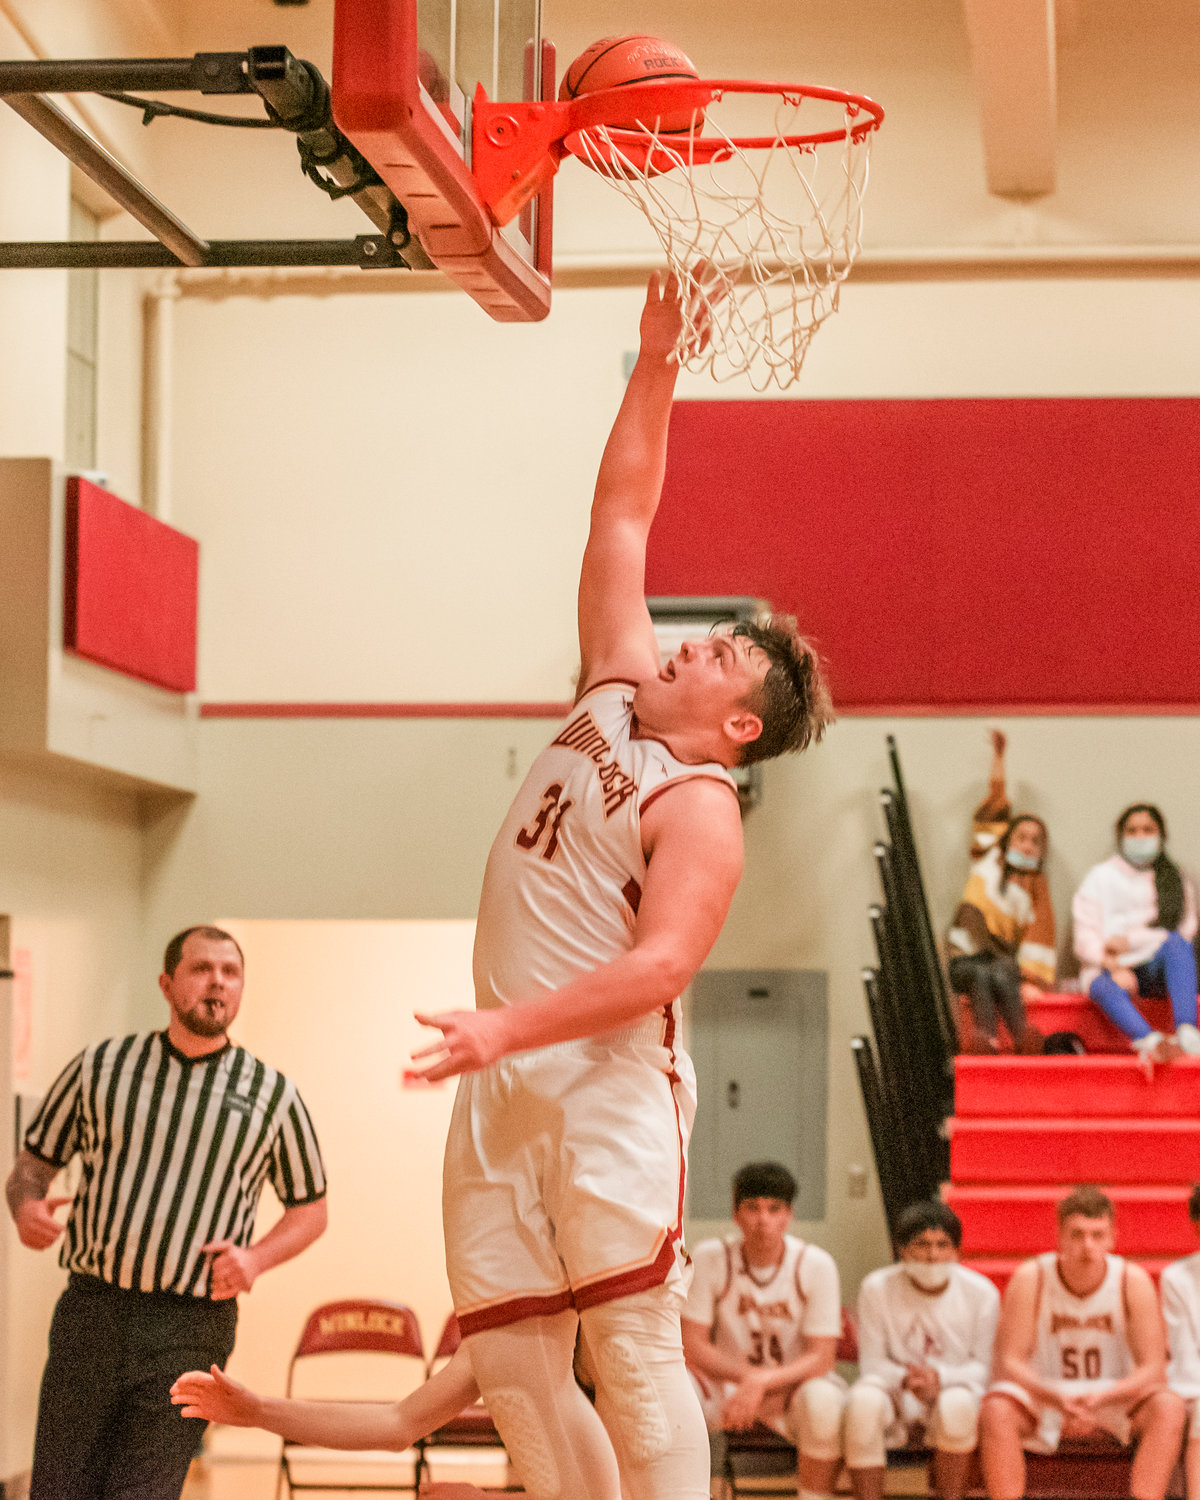 Winlock’s Nolan Swofford (31) puts up points Tuesday night during a game against Toledo.